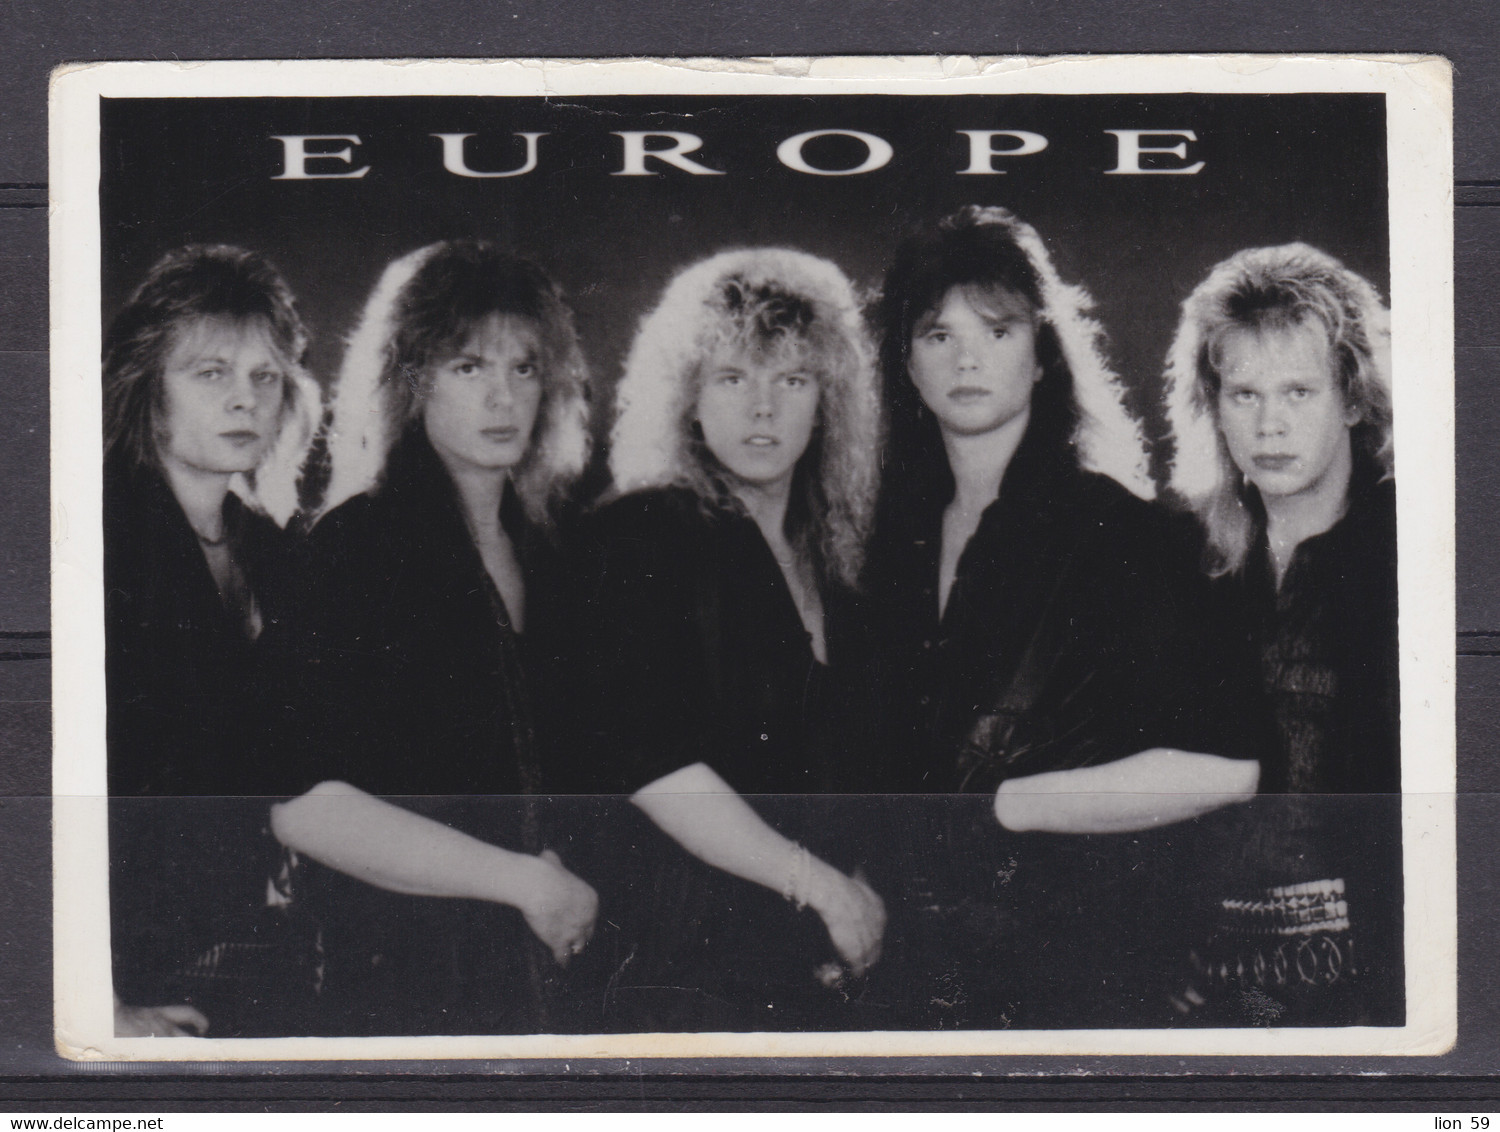 272897 / Europe (band) - Swedish Rock Band Formed In Upplands Väsby, Sweden In 1979, By Frontman Joey Tempest Photo - Fotos